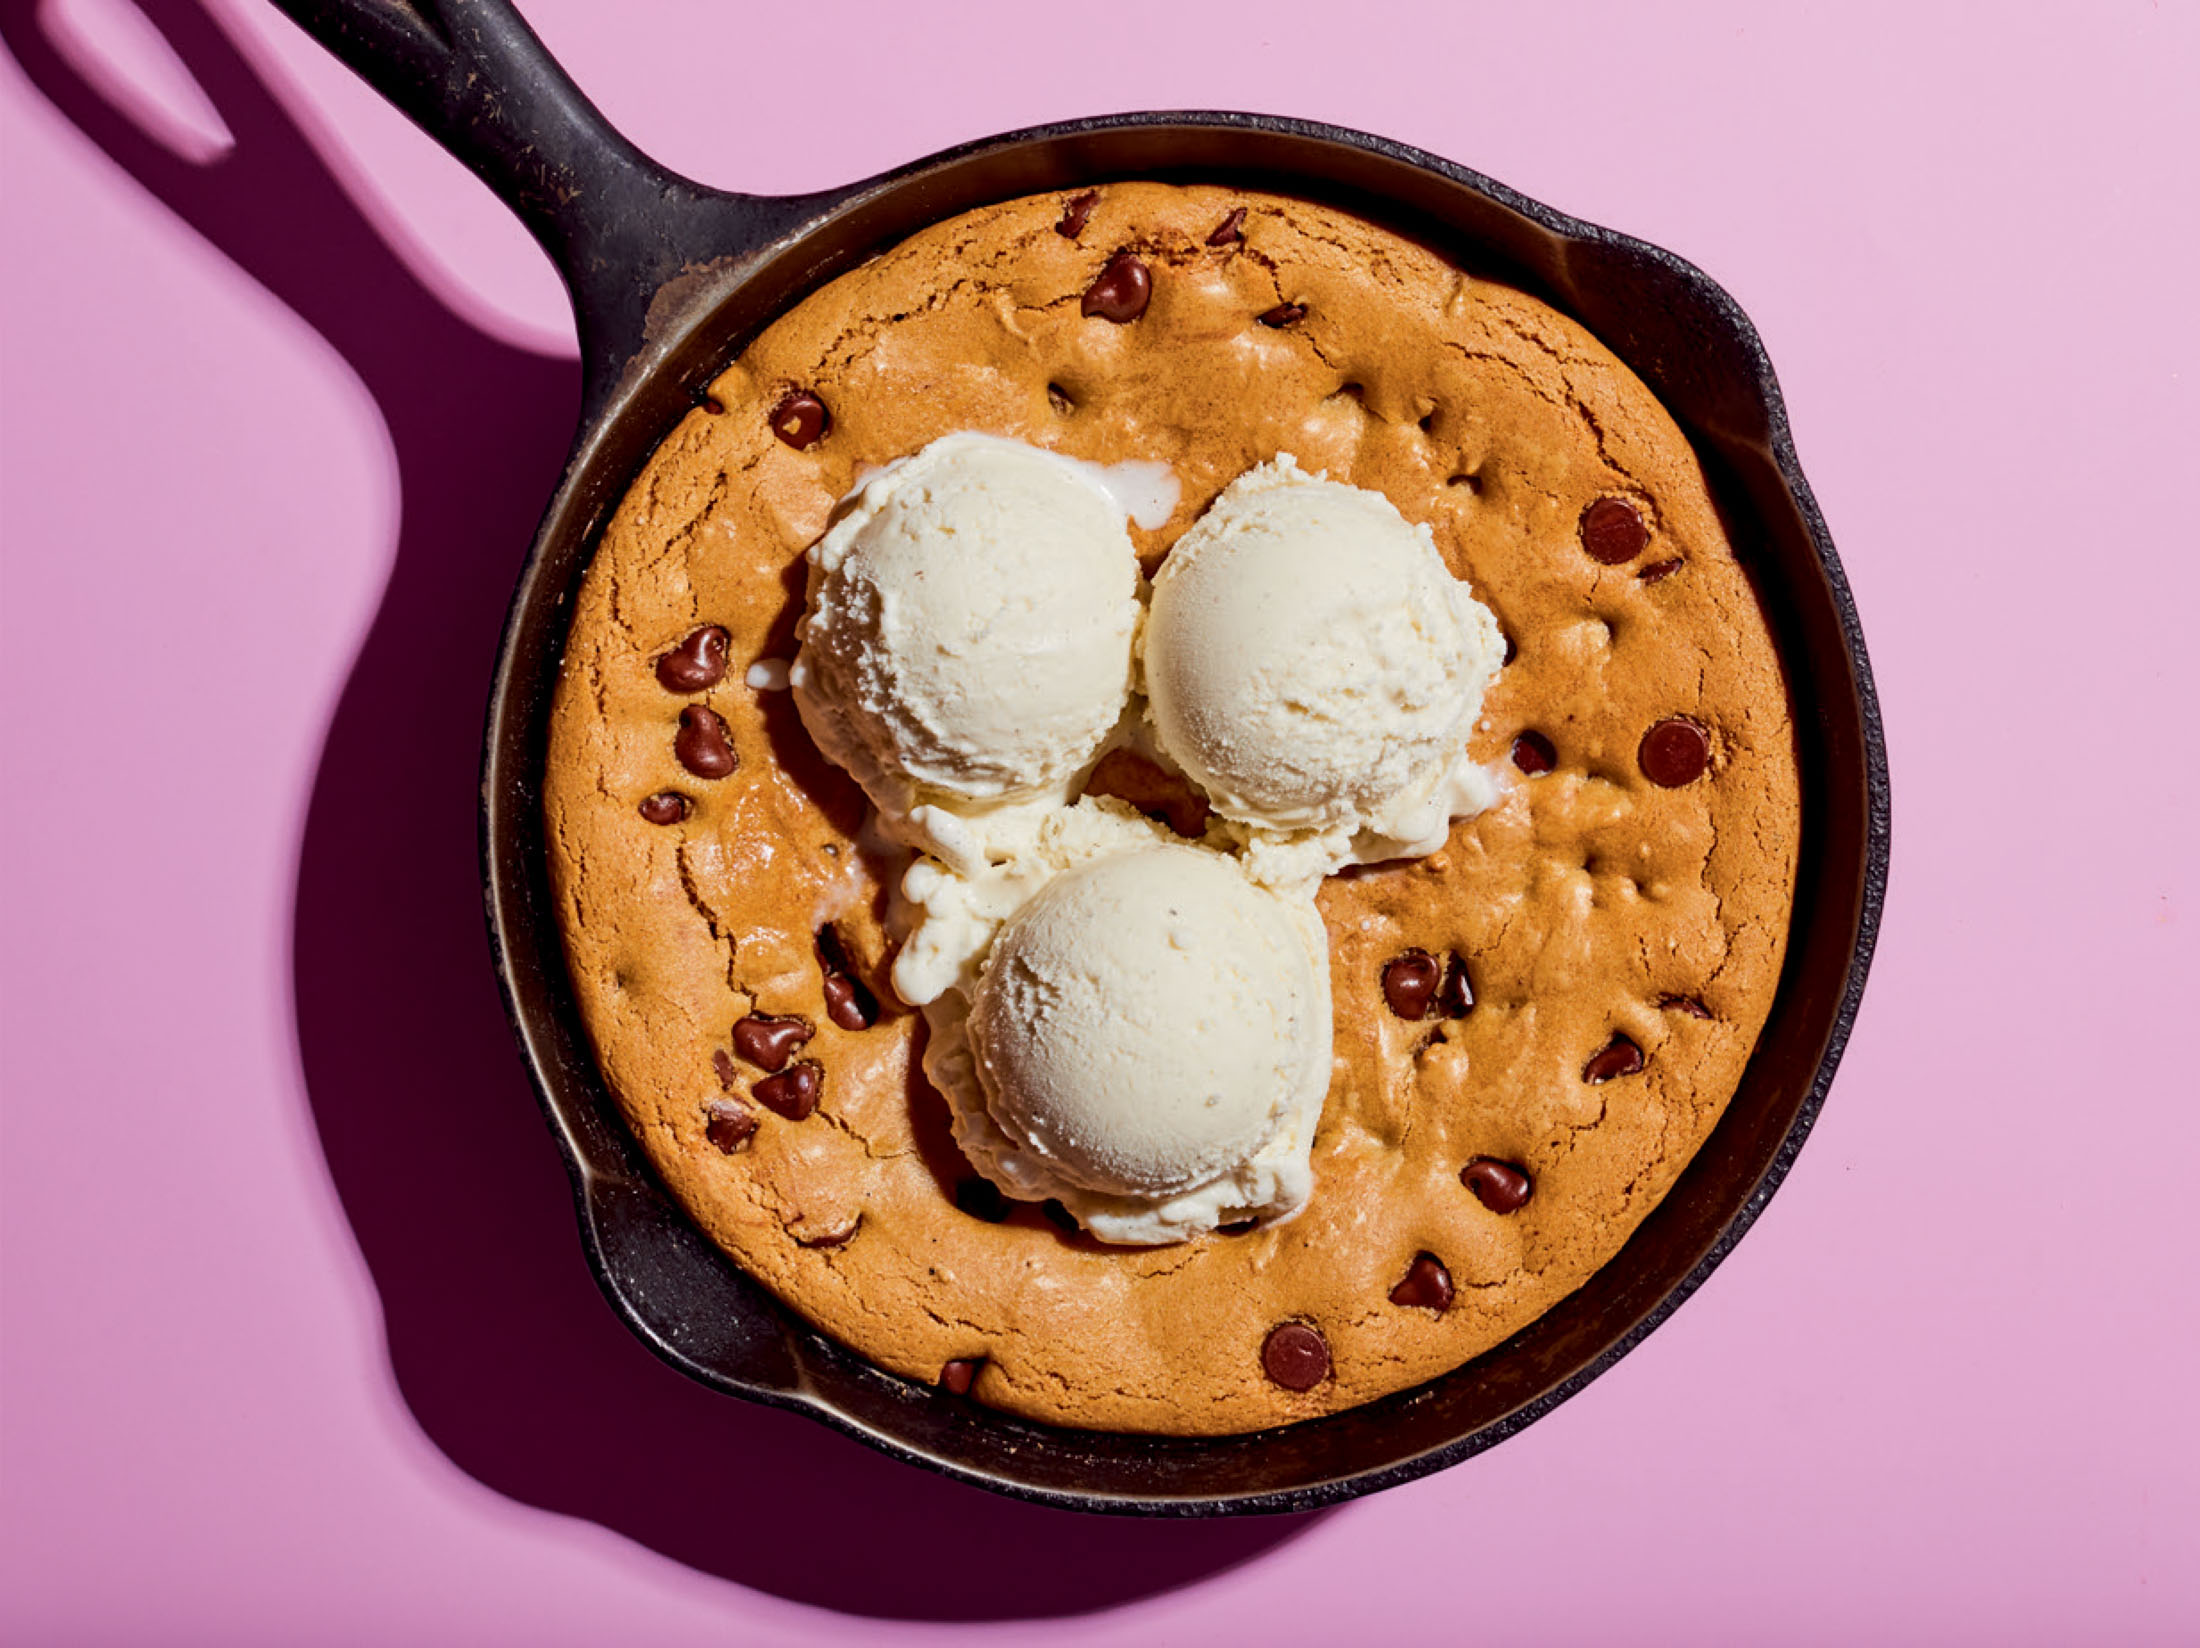 Coolhaus Skillet Chocolate Chip Cookie Recipe Is a Party in a Pan